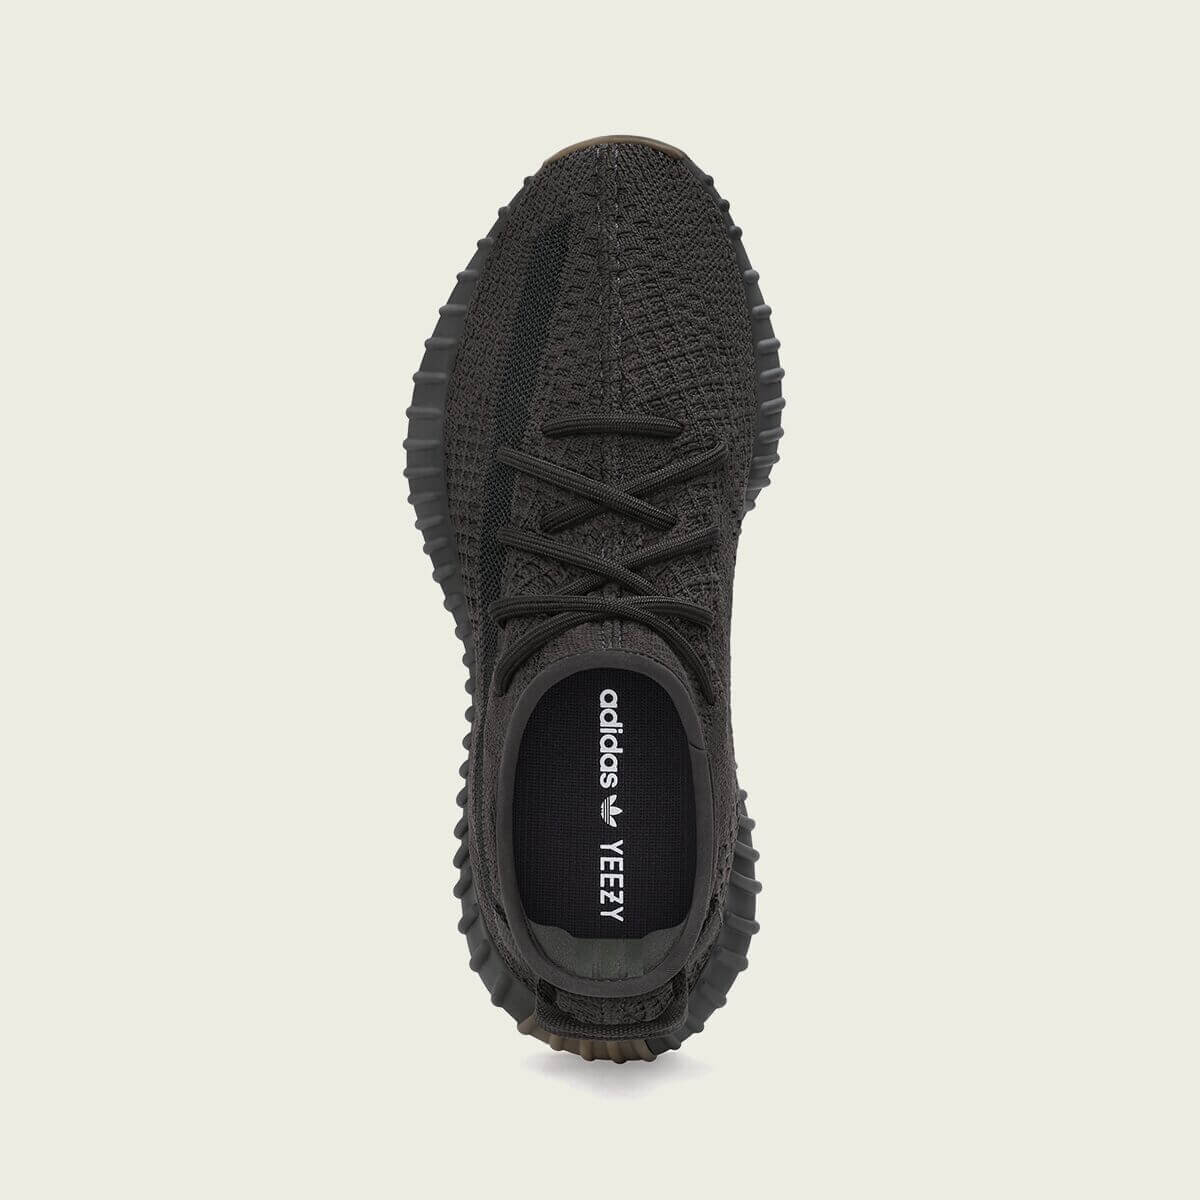 yeezy boost 350 v2 womens size 7